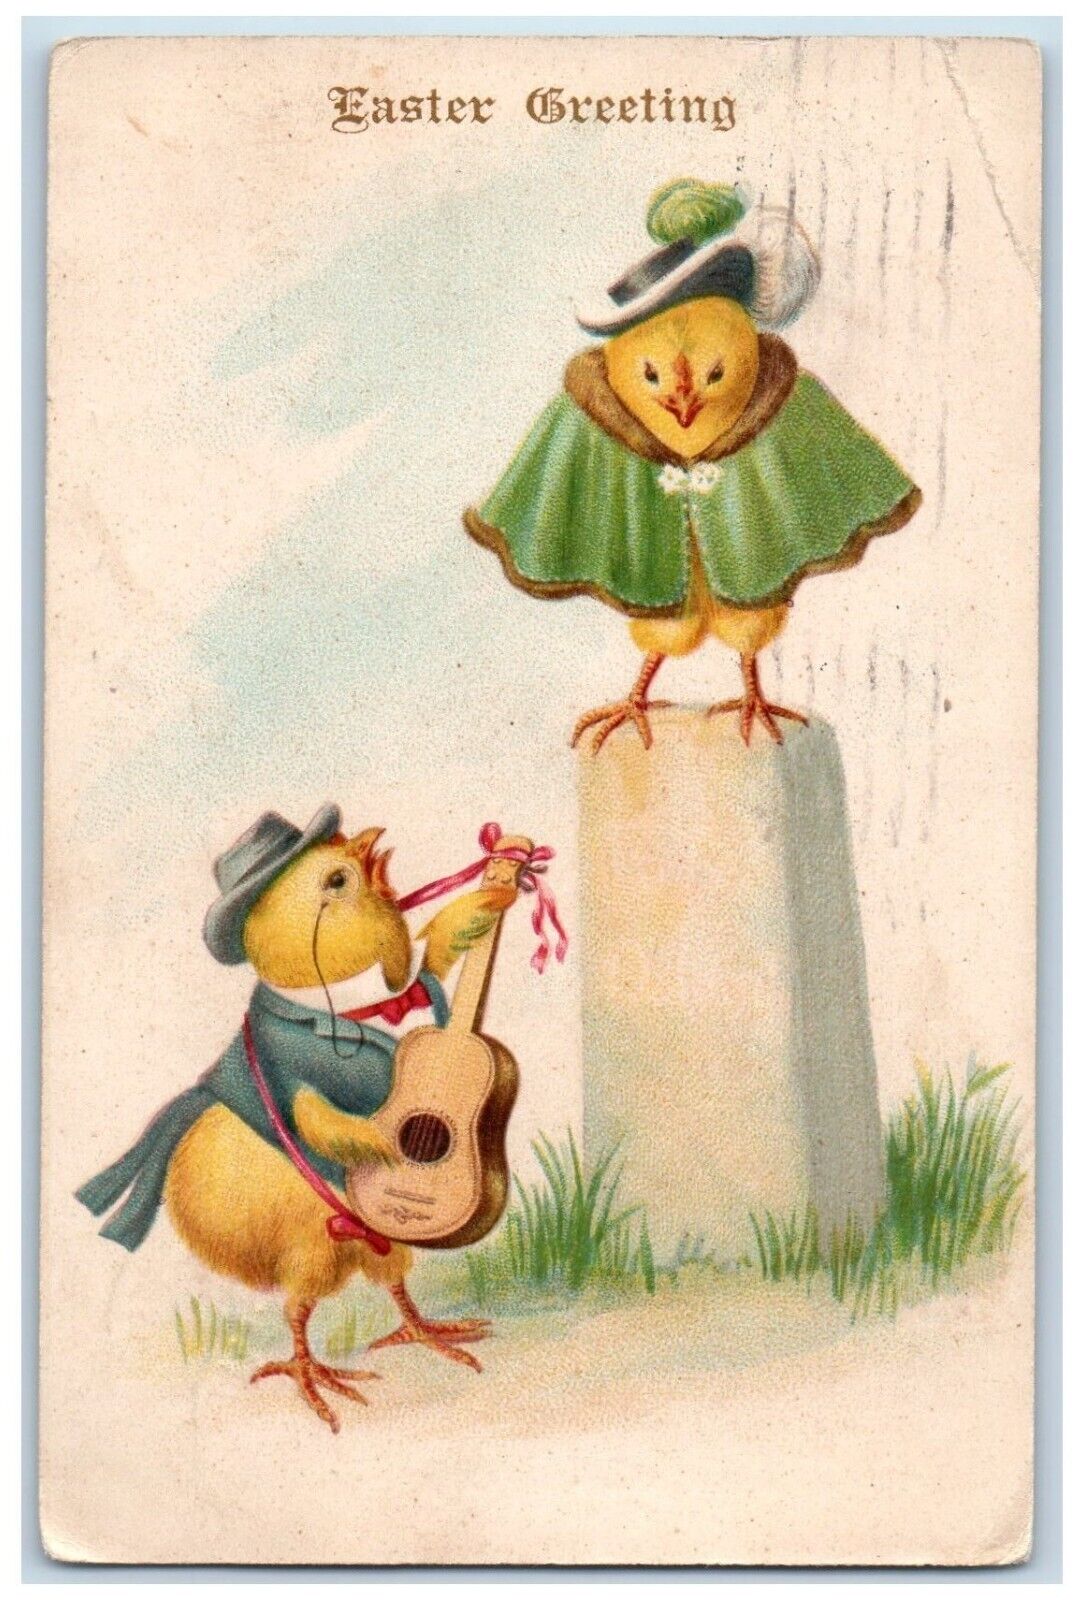 1906 Easter Greeting Anthropomorphic Chicks Serenade Posted Antique Postcard